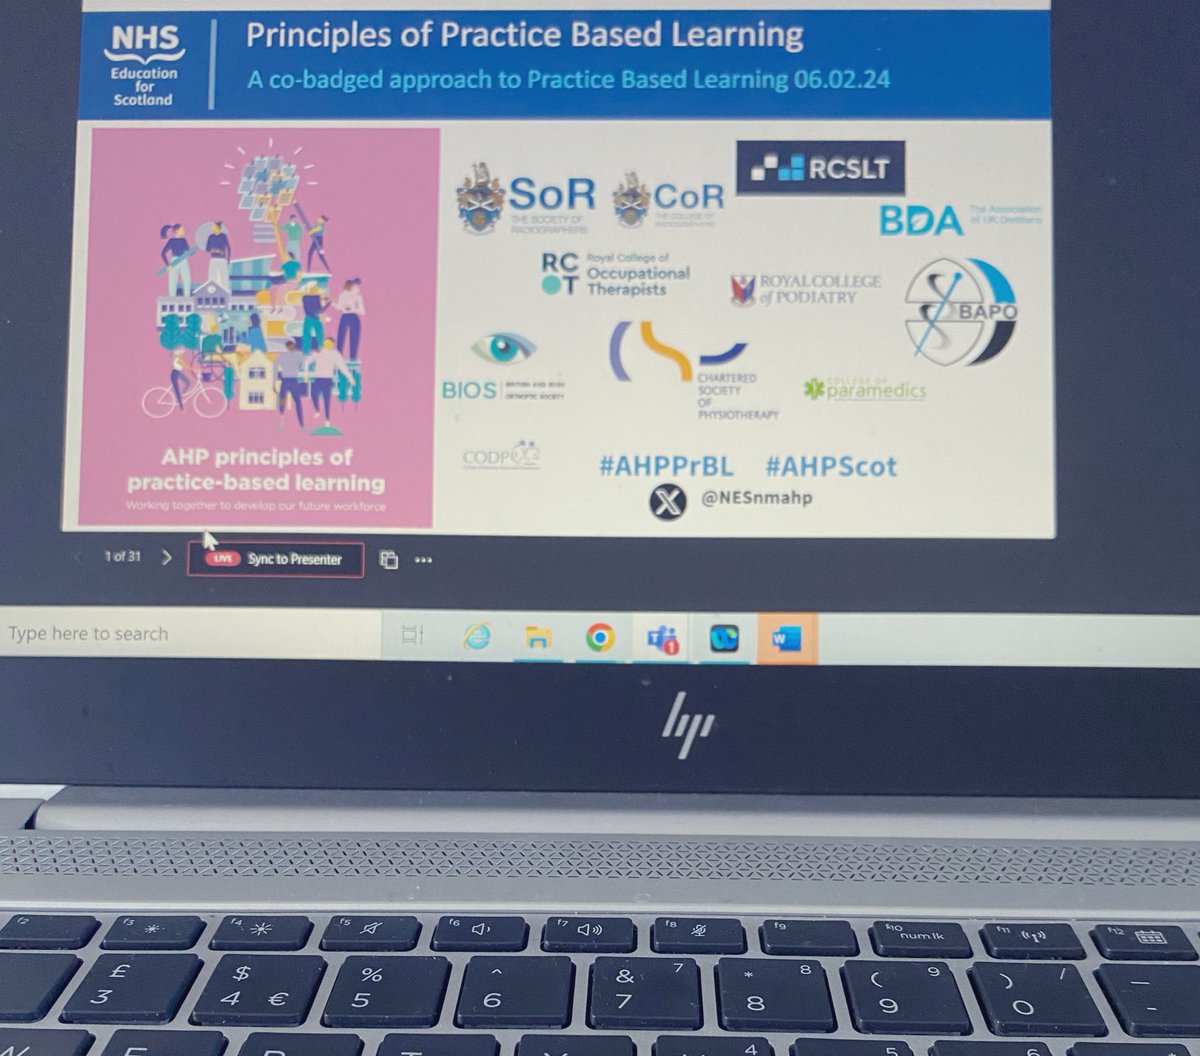 Great to see all the AHP professional bodies coming together to share the Principles of Practice Based Learning at this morning’s webinar.
 
Preparing for the future workforce.

@NESnmahp #AHPPrBL #AHPScot